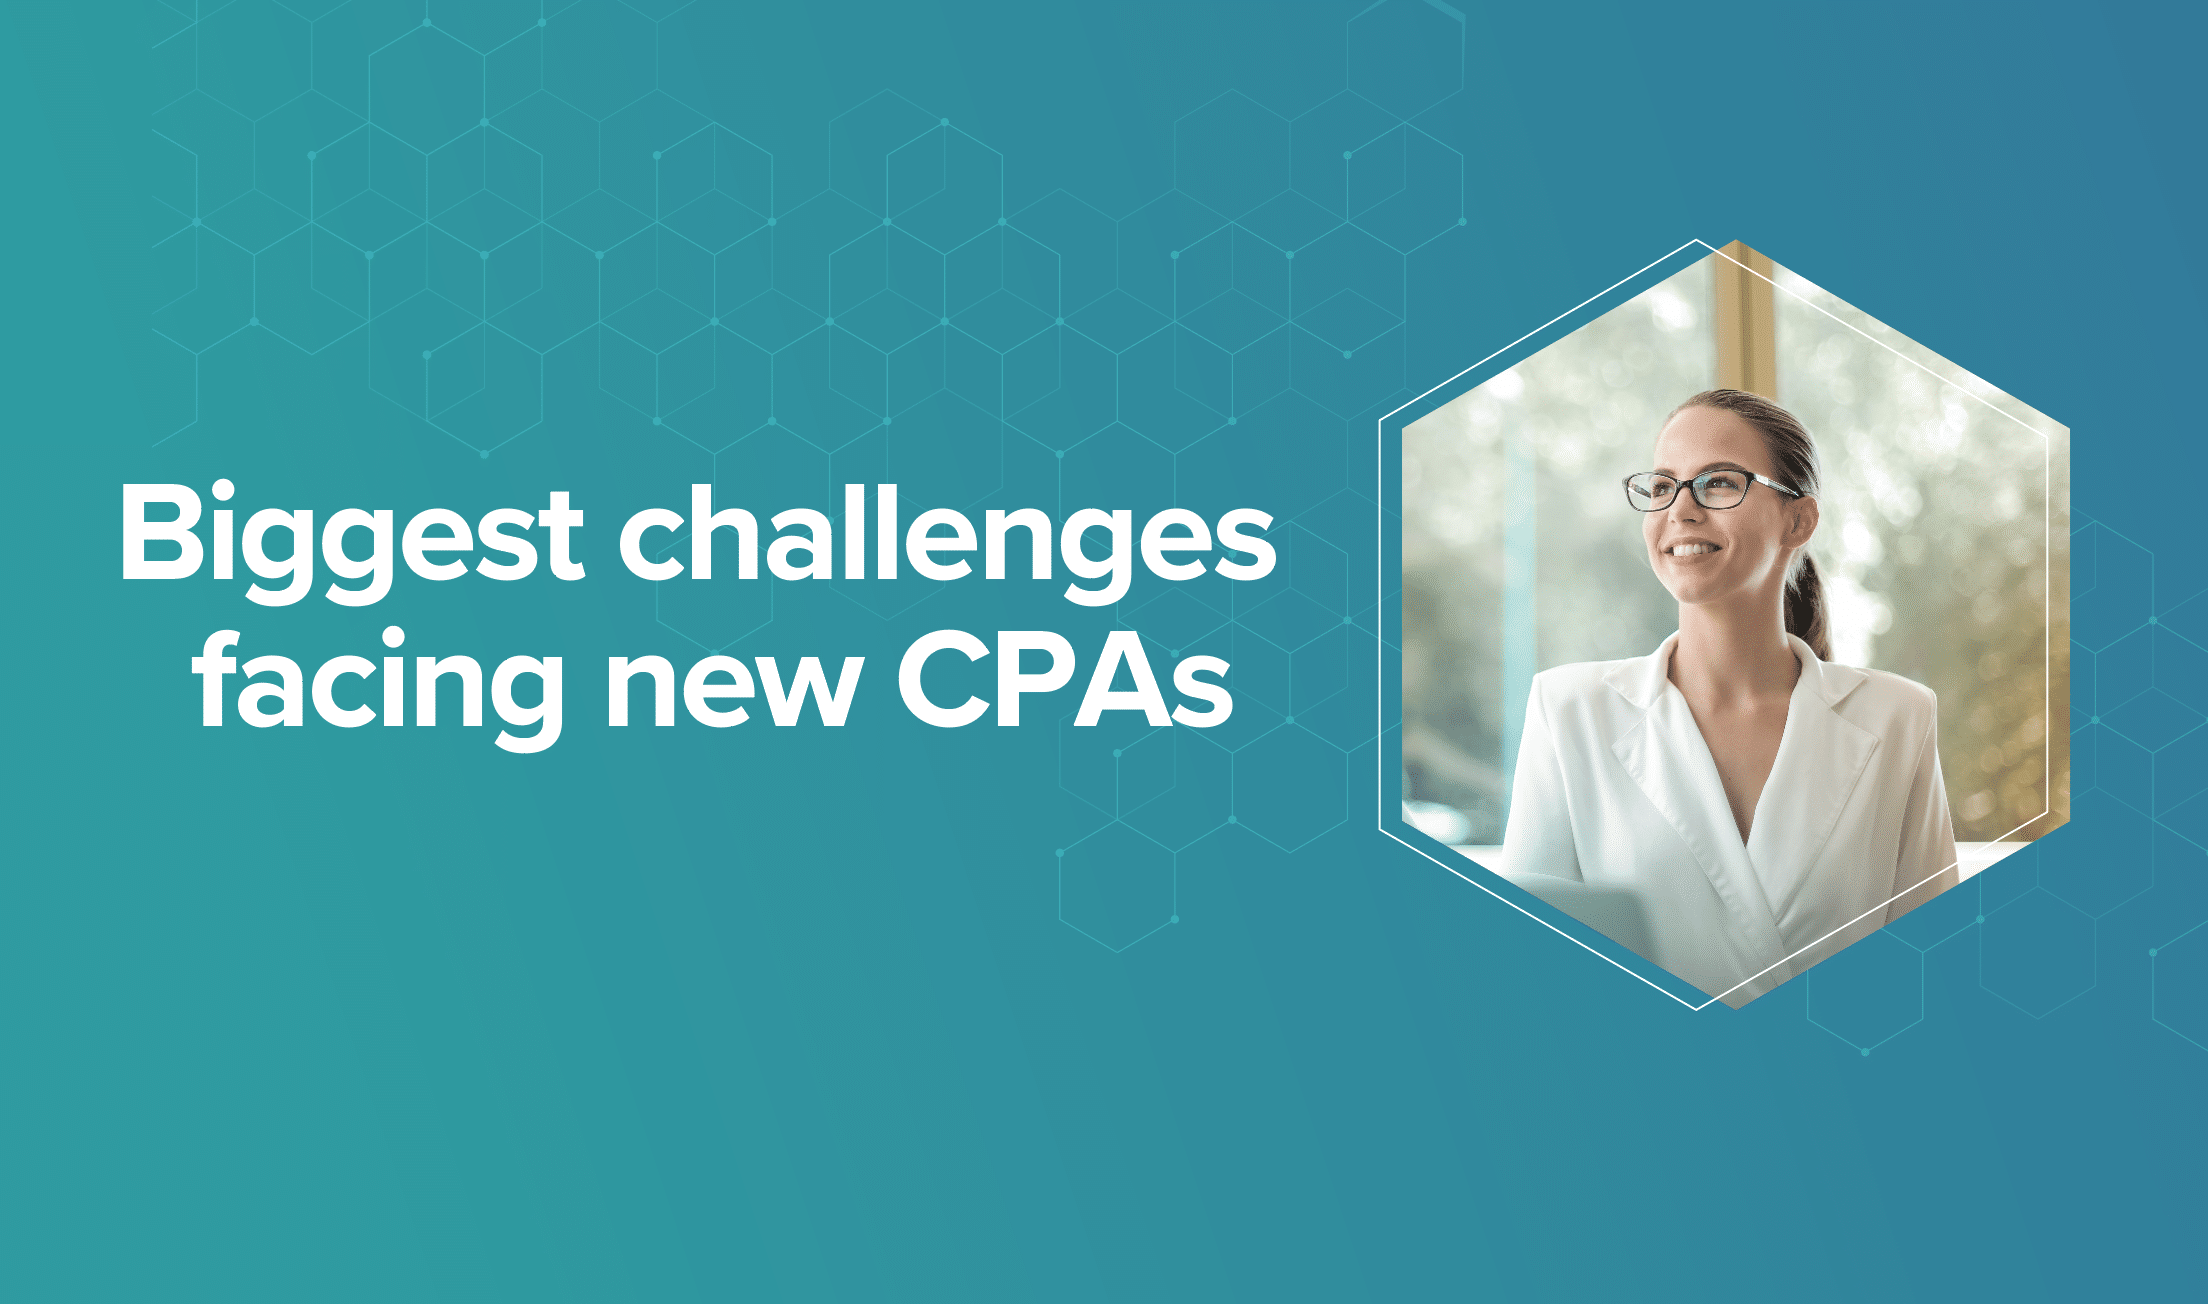 4 business challenges new CPAs face 